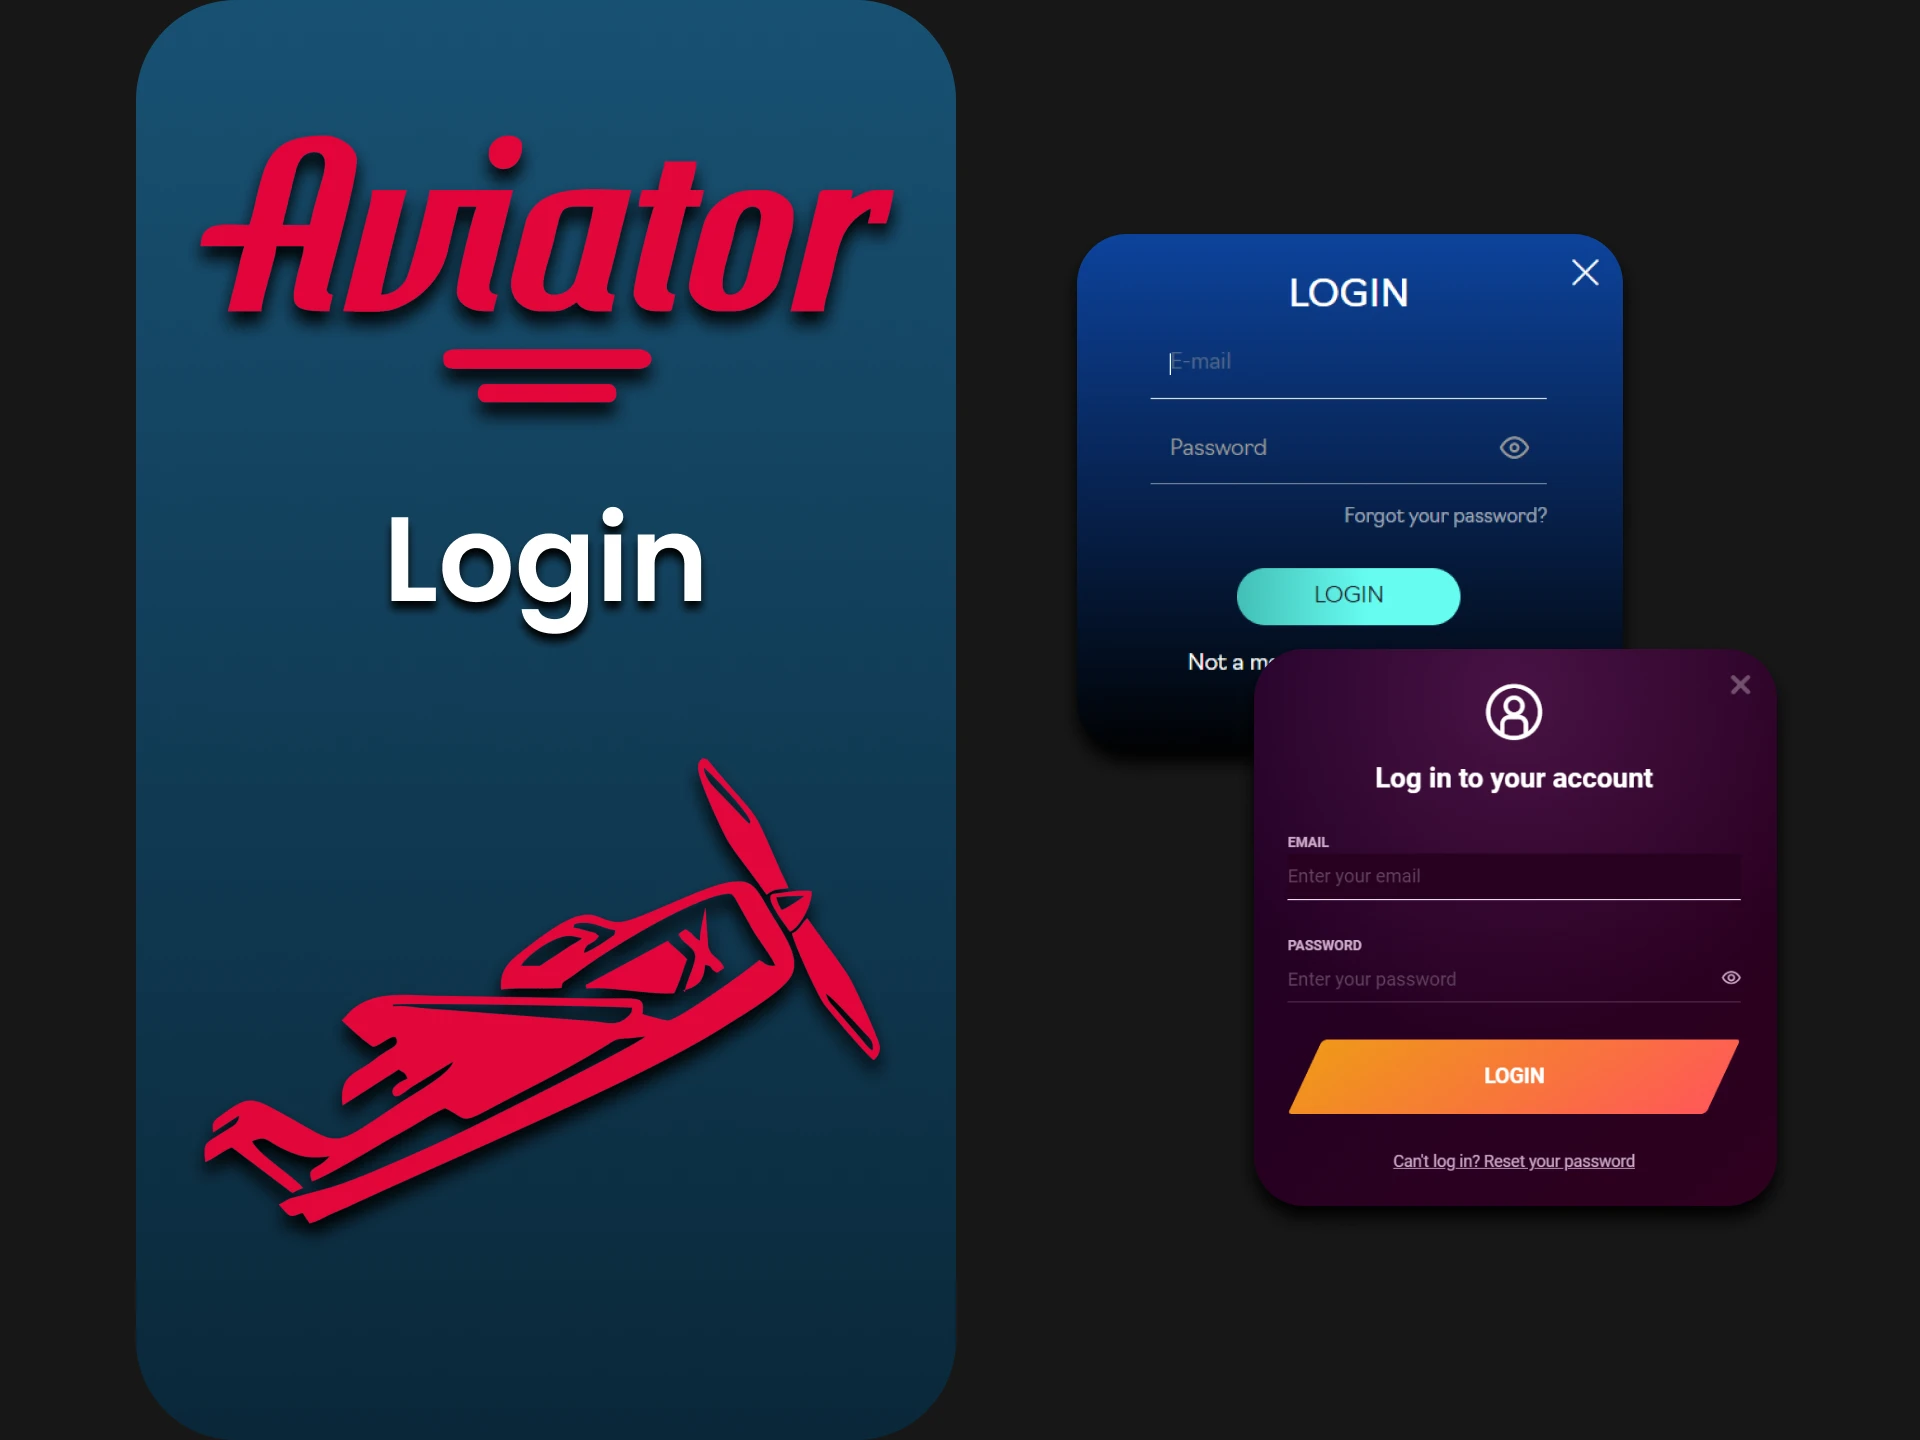 To play Aviator you need to log into your personal account.